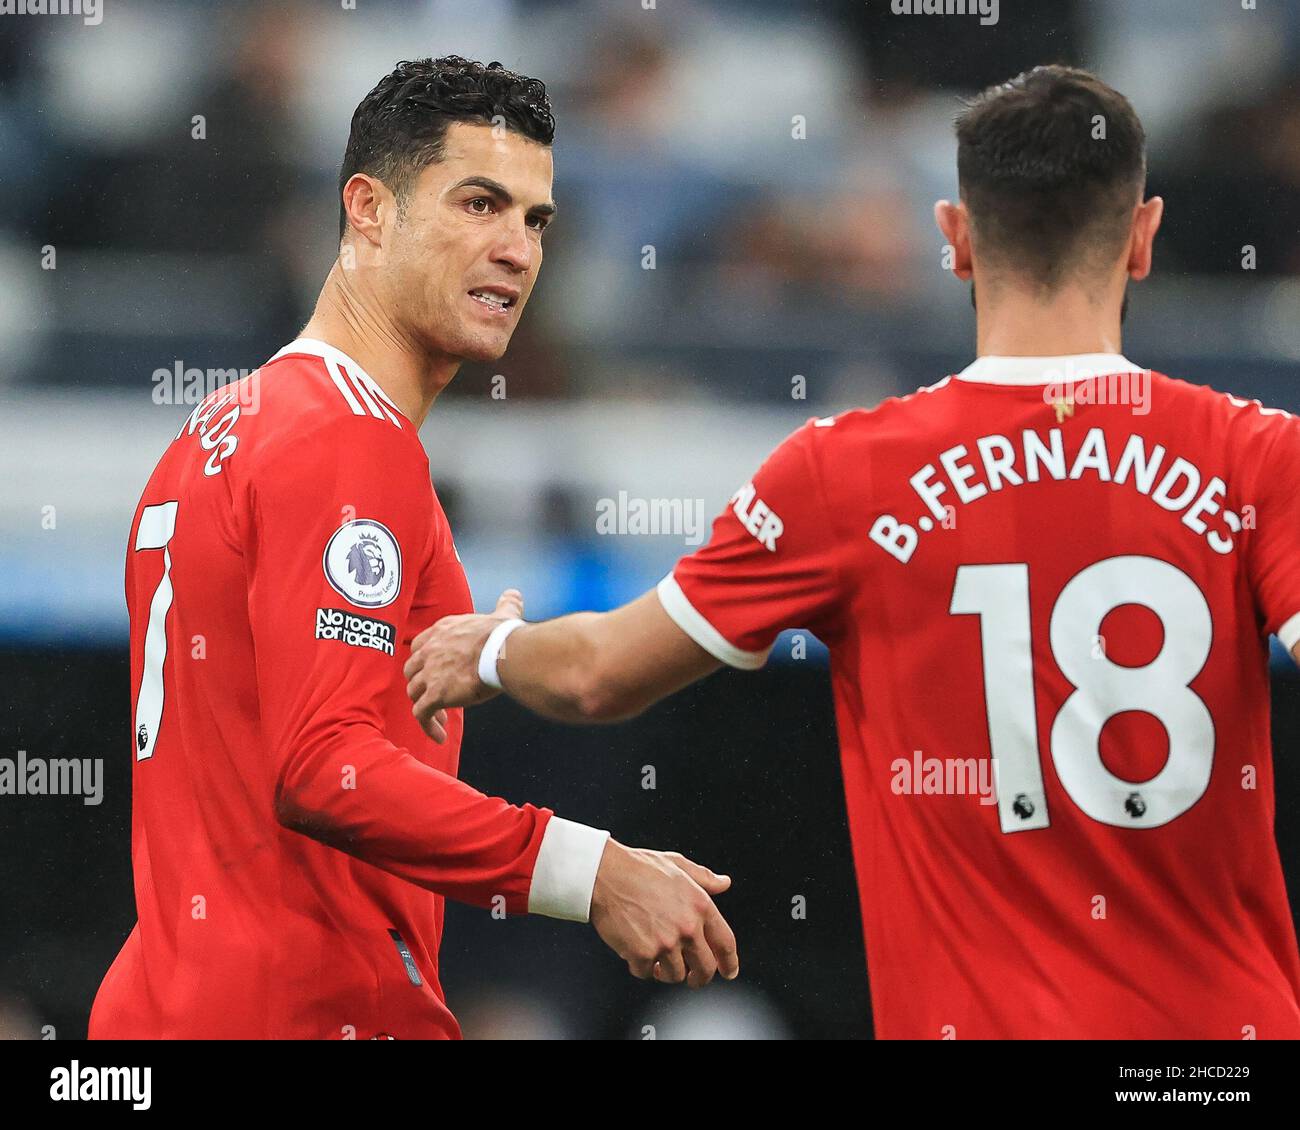 Cristiano Ronaldo #7 of Manchester United speaks to Bruno Fernandes #18 during the game in, on 12/27/2021. (Photo by Mark Cosgrove/News Images/Sipa USA) Credit: Sipa USA/Alamy Live News Stock Photo